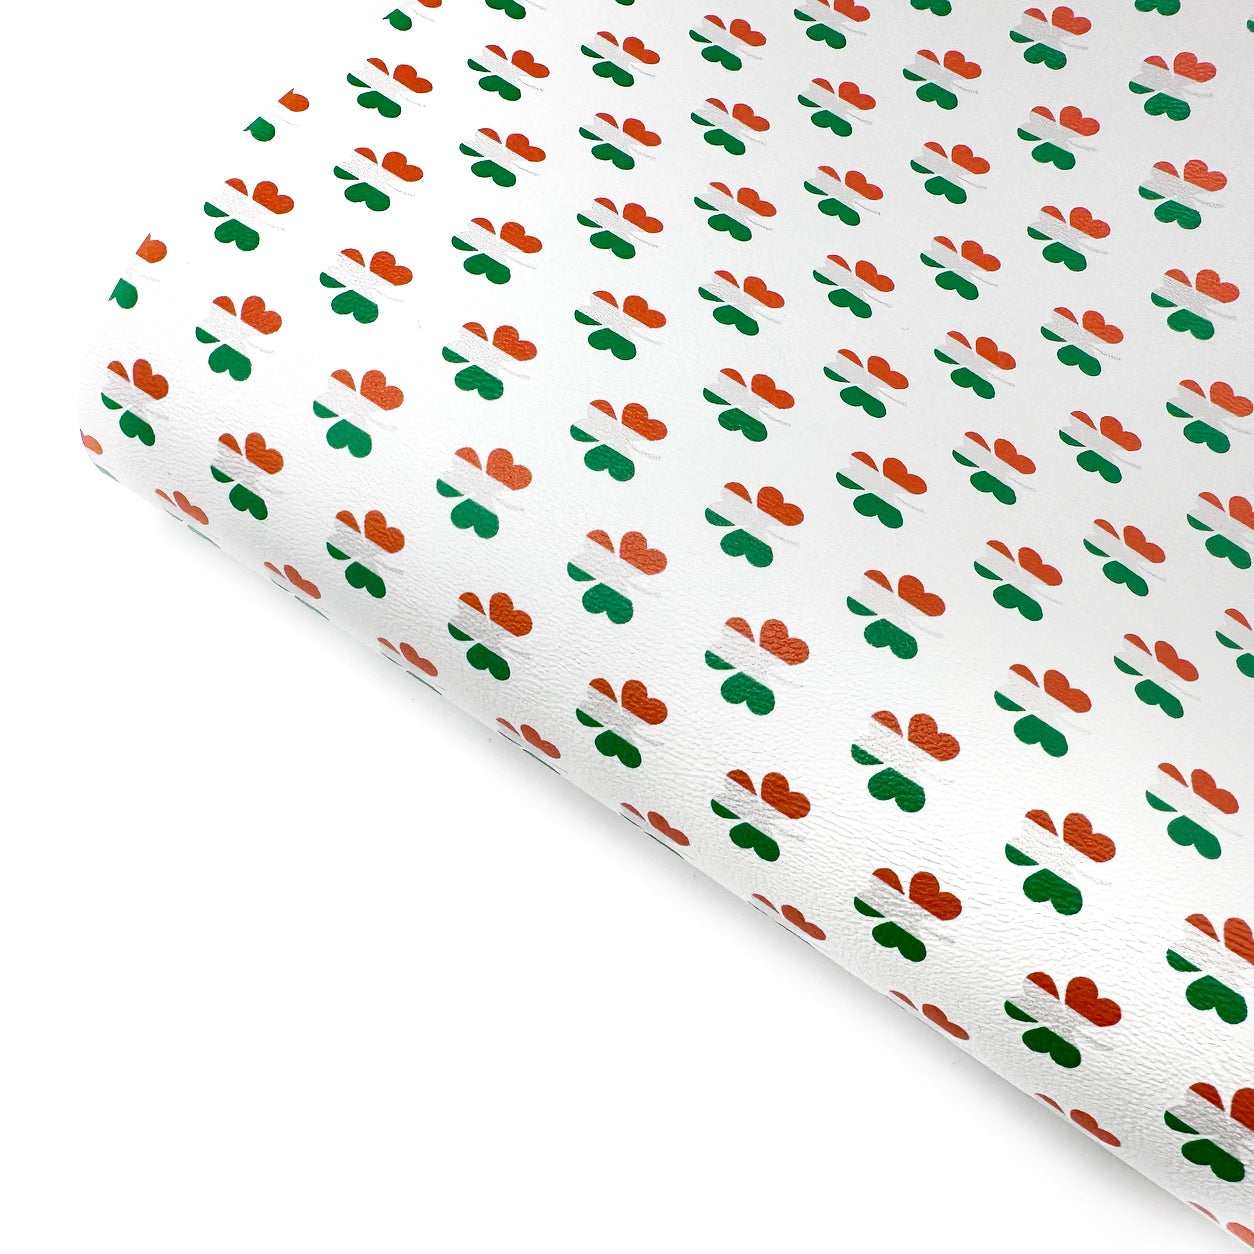 The Irish Clover Faux Leather Fabric Sheets